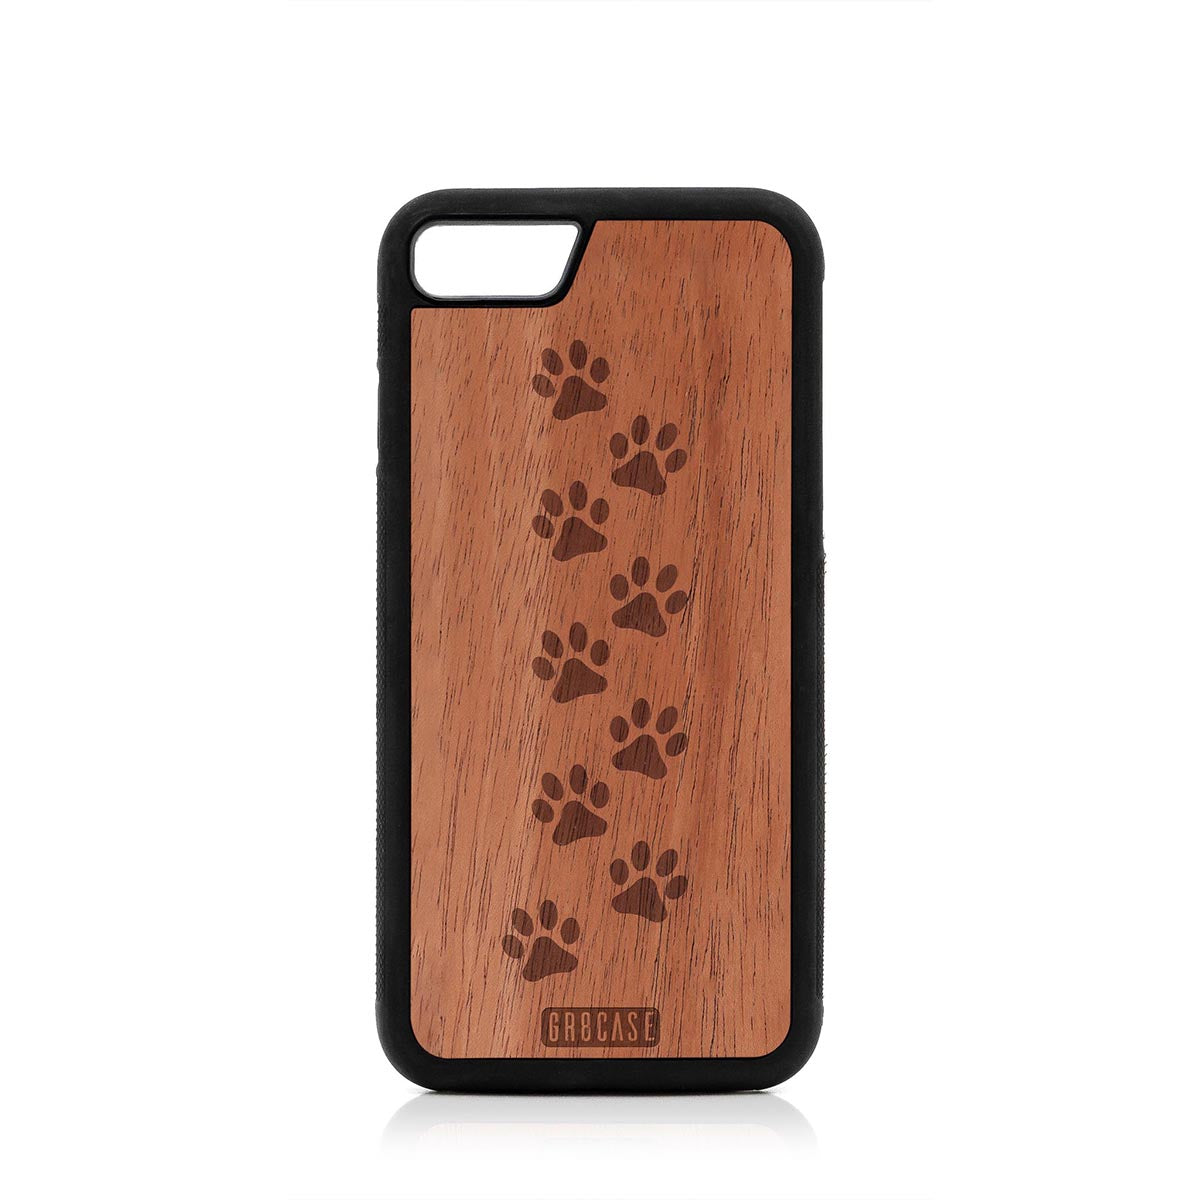 Paw Prints Design Wood Case For iPhone 7/8 by GR8CASE